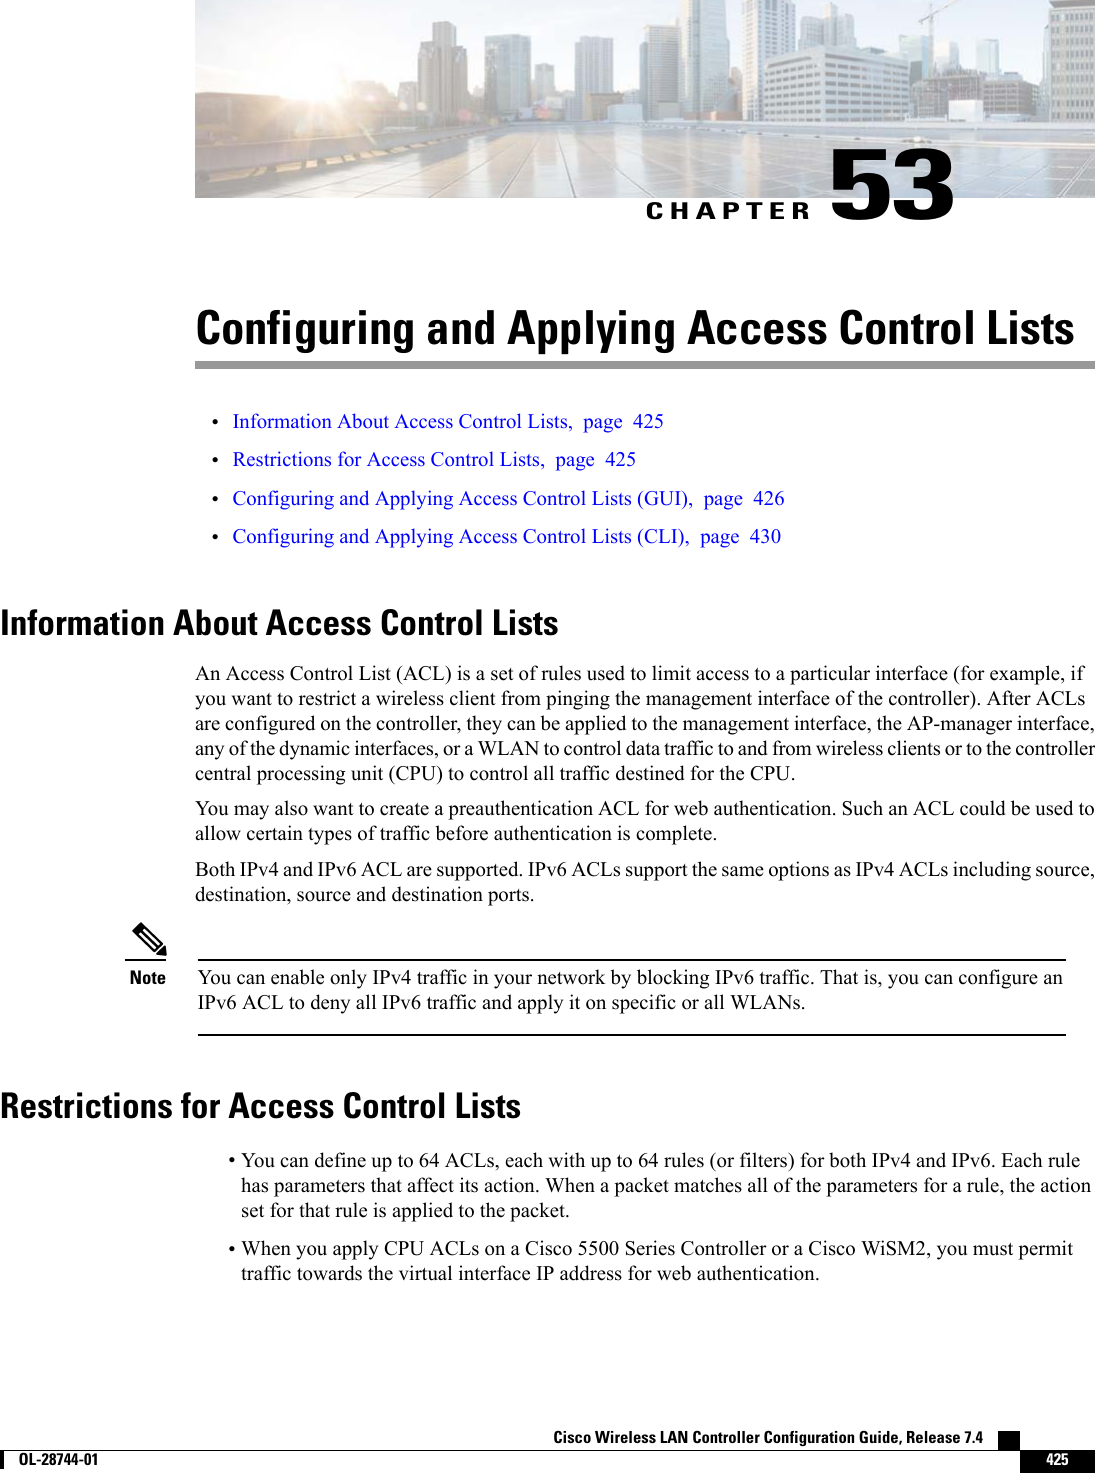 CHAPTER 53Configuring and Applying Access Control Lists•Information About Access Control Lists, page 425•Restrictions for Access Control Lists, page 425•Configuring and Applying Access Control Lists (GUI), page 426•Configuring and Applying Access Control Lists (CLI), page 430Information About Access Control ListsAn Access Control List (ACL) is a set of rules used to limit access to a particular interface (for example, ifyou want to restrict a wireless client from pinging the management interface of the controller). After ACLsare configured on the controller, they can be applied to the management interface, the AP-manager interface,any of the dynamic interfaces, or a WLAN to control data traffic to and from wireless clients or to the controllercentral processing unit (CPU) to control all traffic destined for the CPU.You may also want to create a preauthentication ACL for web authentication. Such an ACL could be used toallow certain types of traffic before authentication is complete.Both IPv4 and IPv6 ACL are supported. IPv6 ACLs support the same options as IPv4 ACLs including source,destination, source and destination ports.You can enable only IPv4 traffic in your network by blocking IPv6 traffic. That is, you can configure anIPv6 ACL to deny all IPv6 traffic and apply it on specific or all WLANs.NoteRestrictions for Access Control Lists•You can define up to 64 ACLs, each with up to 64 rules (or filters) for both IPv4 and IPv6. Each rulehas parameters that affect its action. When a packet matches all of the parameters for a rule, the actionset for that rule is applied to the packet.•When you apply CPU ACLs on a Cisco 5500 Series Controller or a Cisco WiSM2, you must permittraffic towards the virtual interface IP address for web authentication.Cisco Wireless LAN Controller Configuration Guide, Release 7.4        OL-28744-01 425